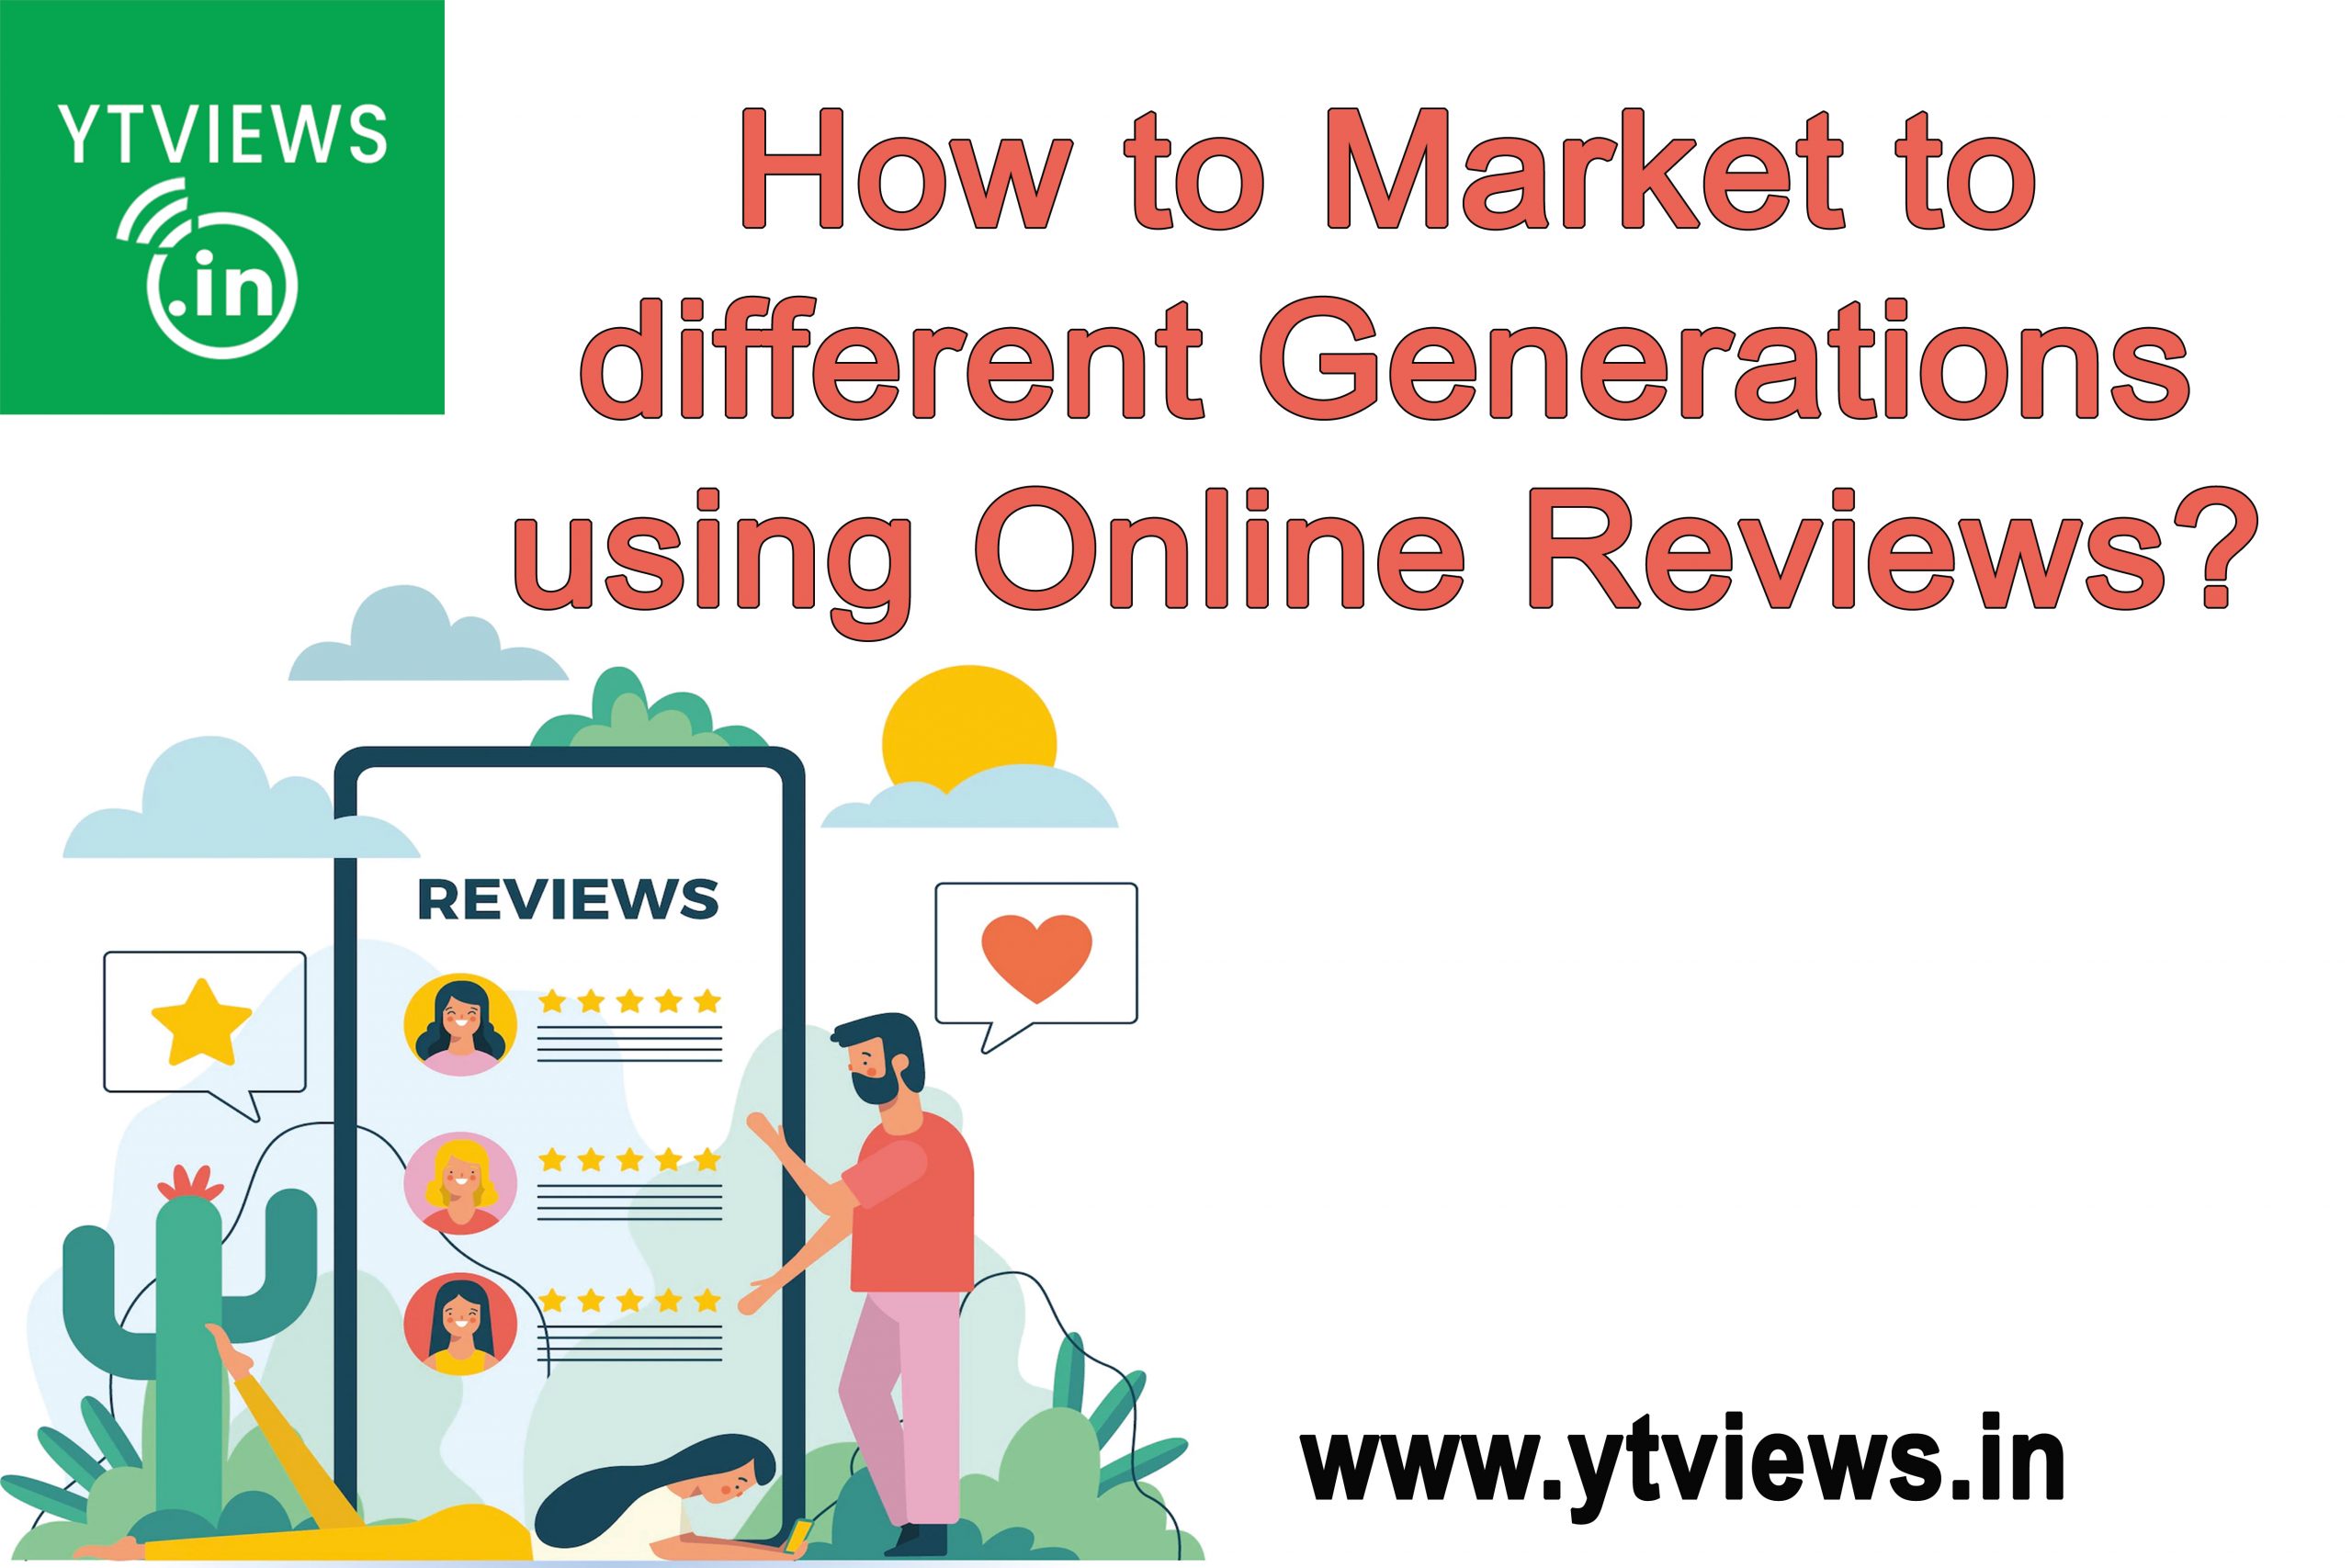 How to Market to different Generations Using Online Reviews